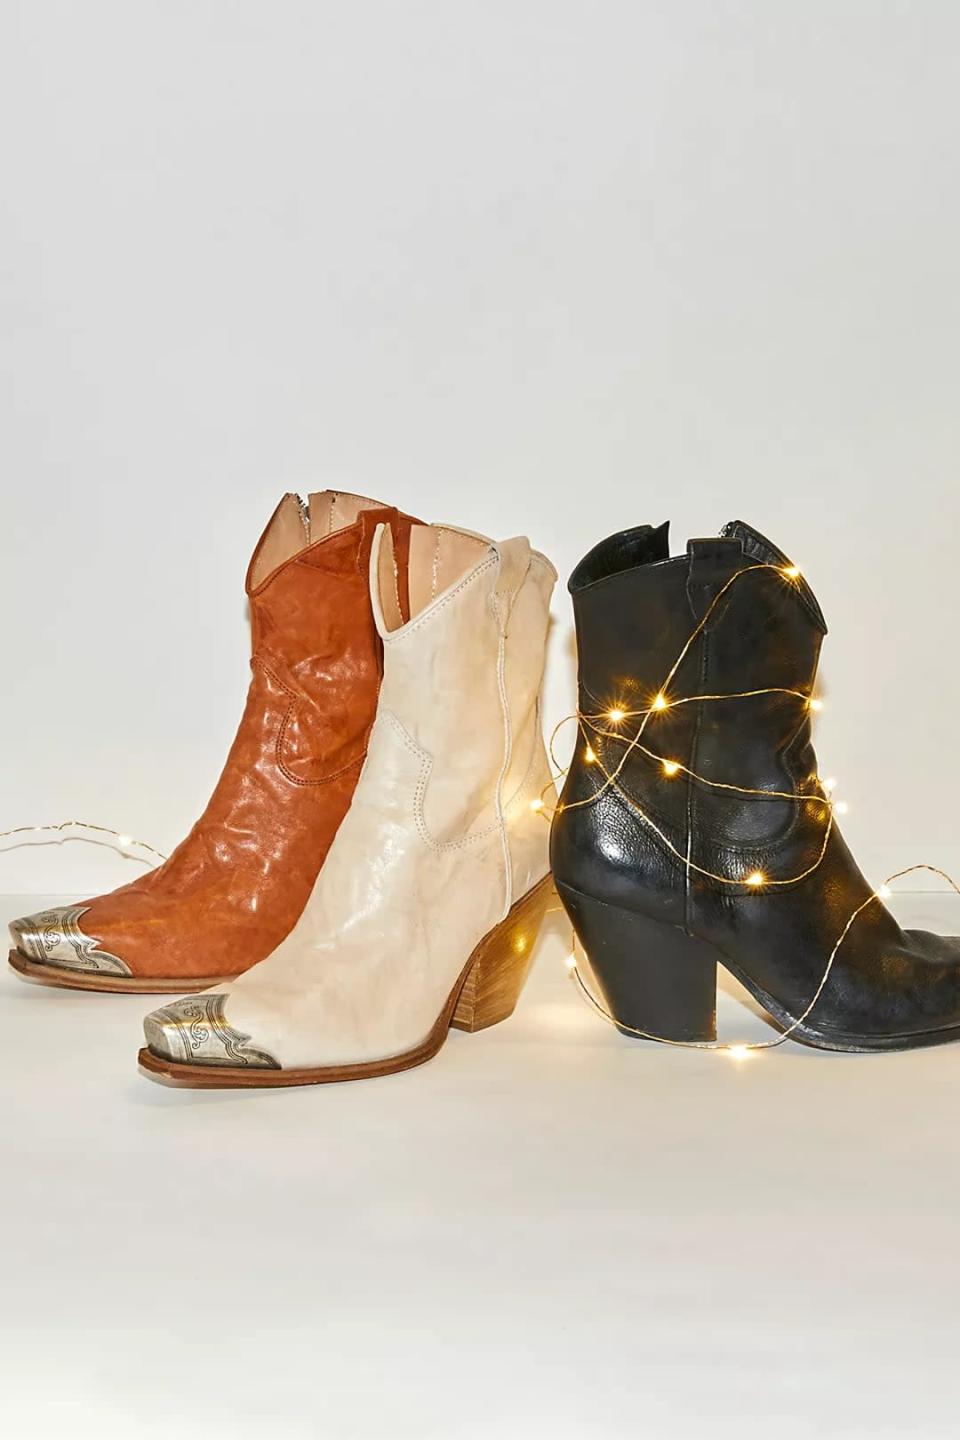 <p>Cowboy boots are still very much in style. These <span>Free People Brayden Western Boots</span> ($298) have a cool toe, and look great with flares or a miniskirt.</p>